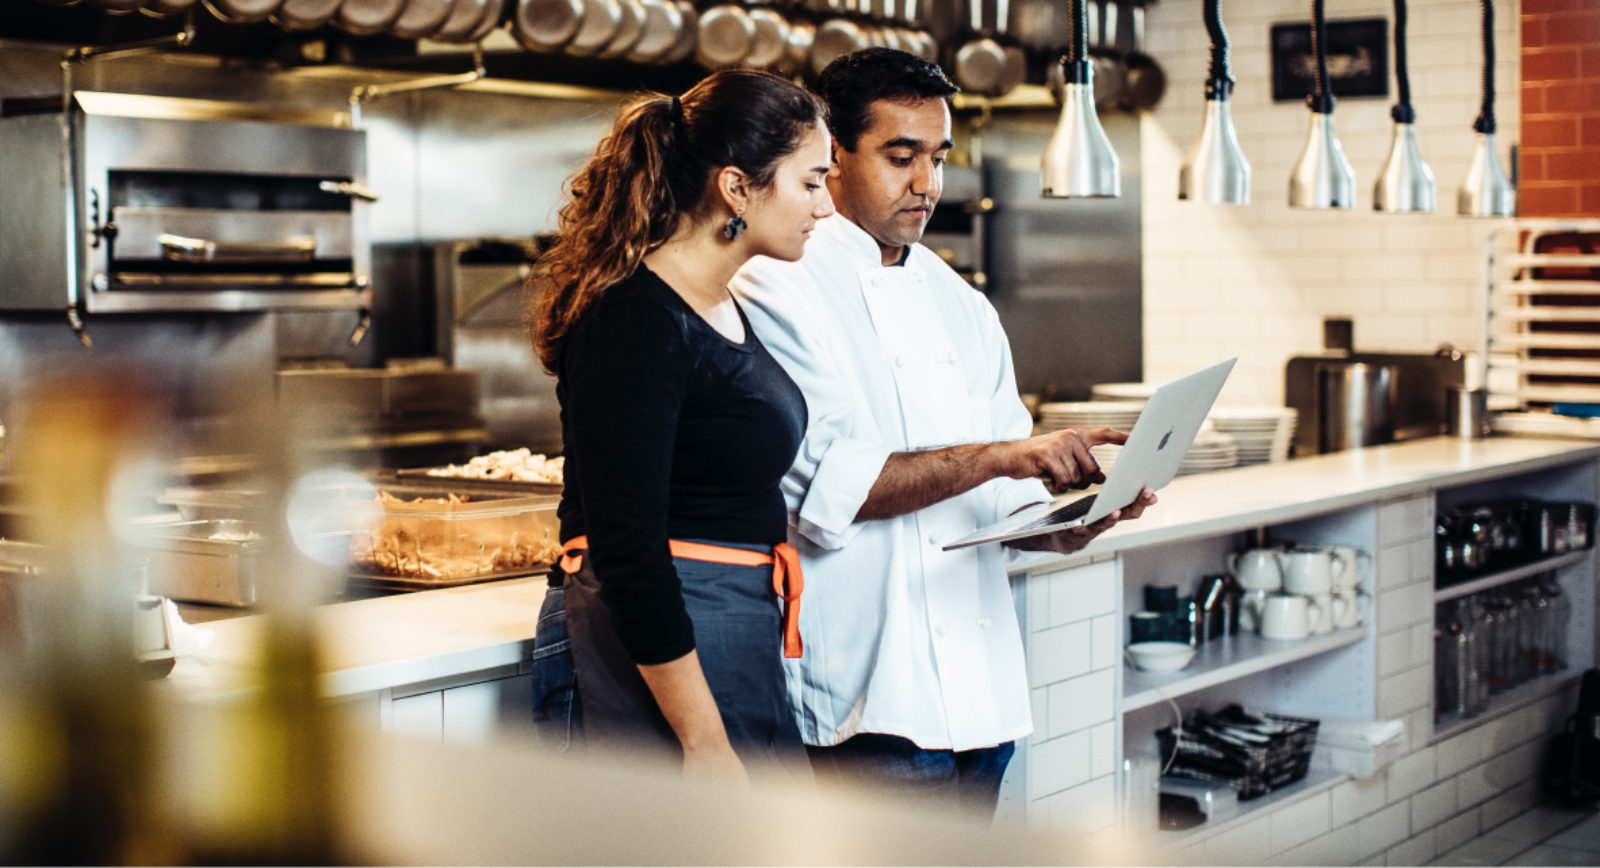 Restaurant Management System: What You Need to Know